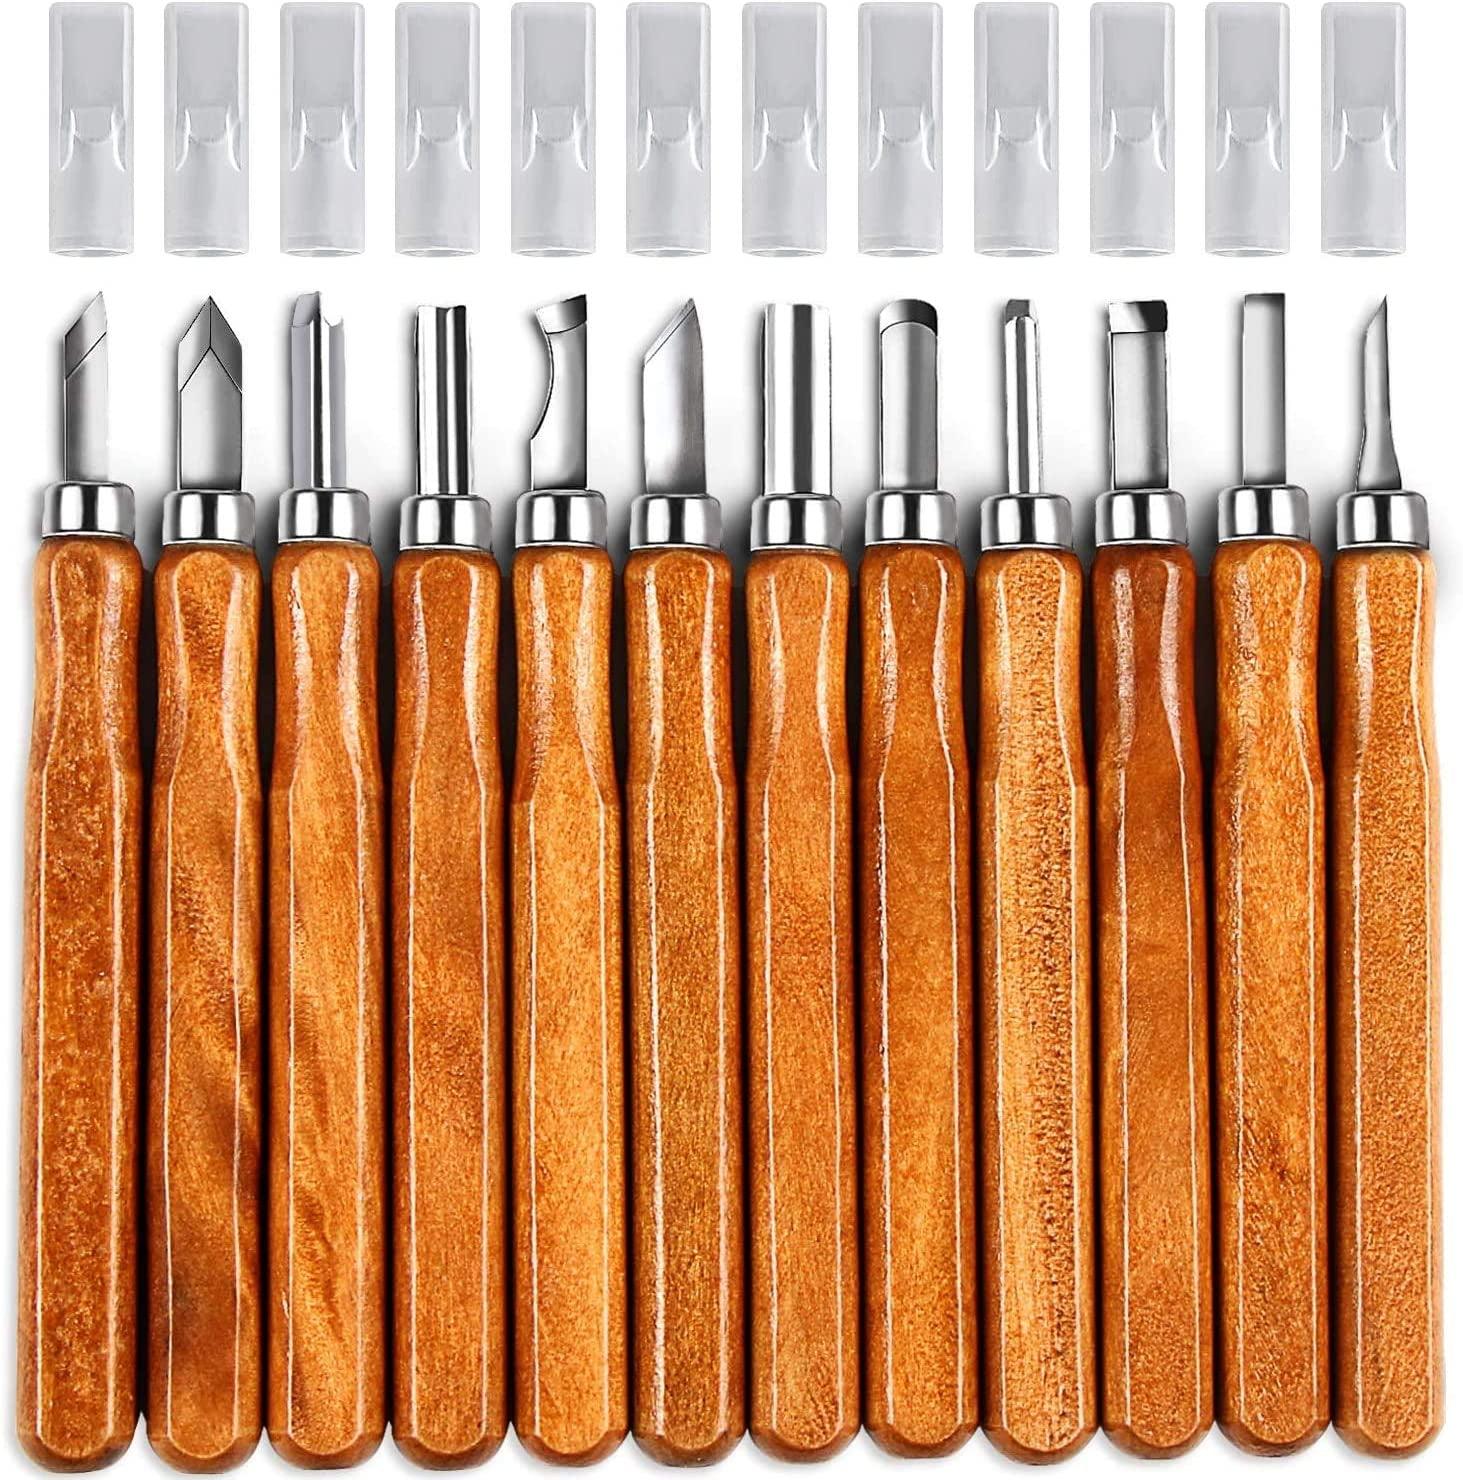 Wood Carving Tools Knife Set 20PCS DIY Wood Carving Kit for Beginners  Woodworking Knife Kit with Detail Wood Carving Tools, Whittling Knife